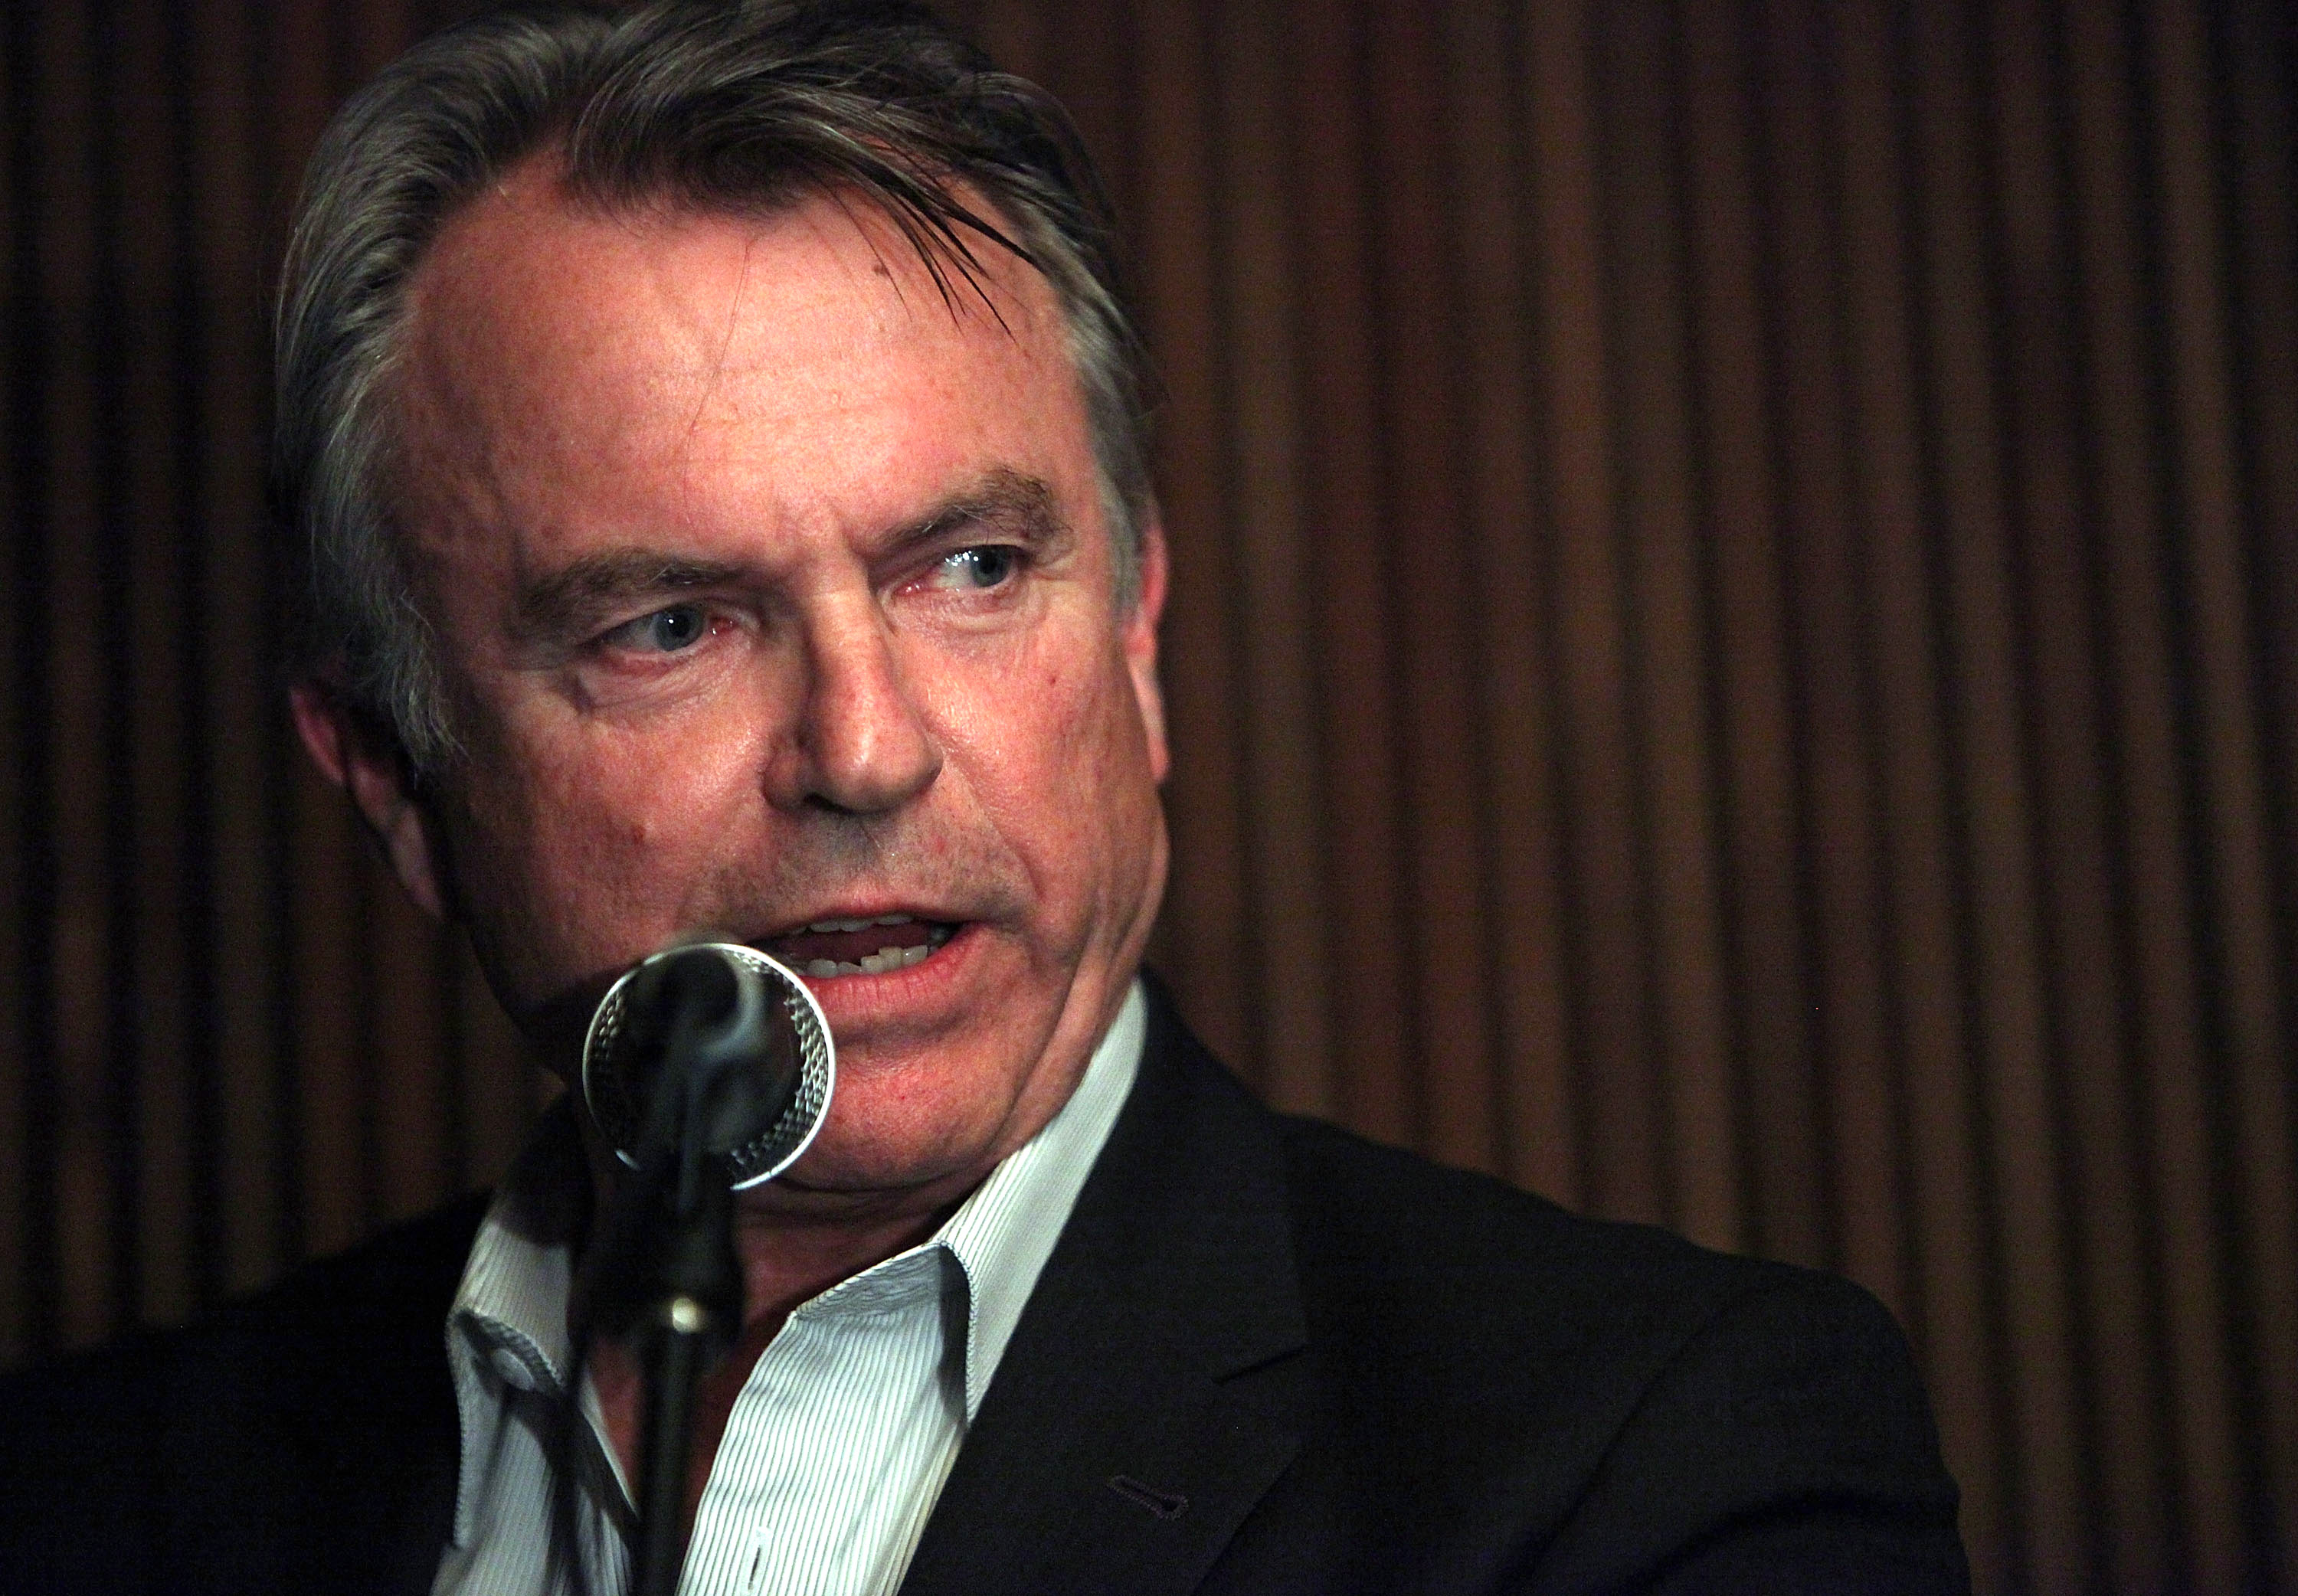 Sam Neill gives a speech at the Hope For Orphans Japan fundraising dinner to raise money to help orphans living in the Iwate prefecture following the Japan earthquake and tsunami on July 26, 2011 in Sydney, Australia | Source: Getty Images